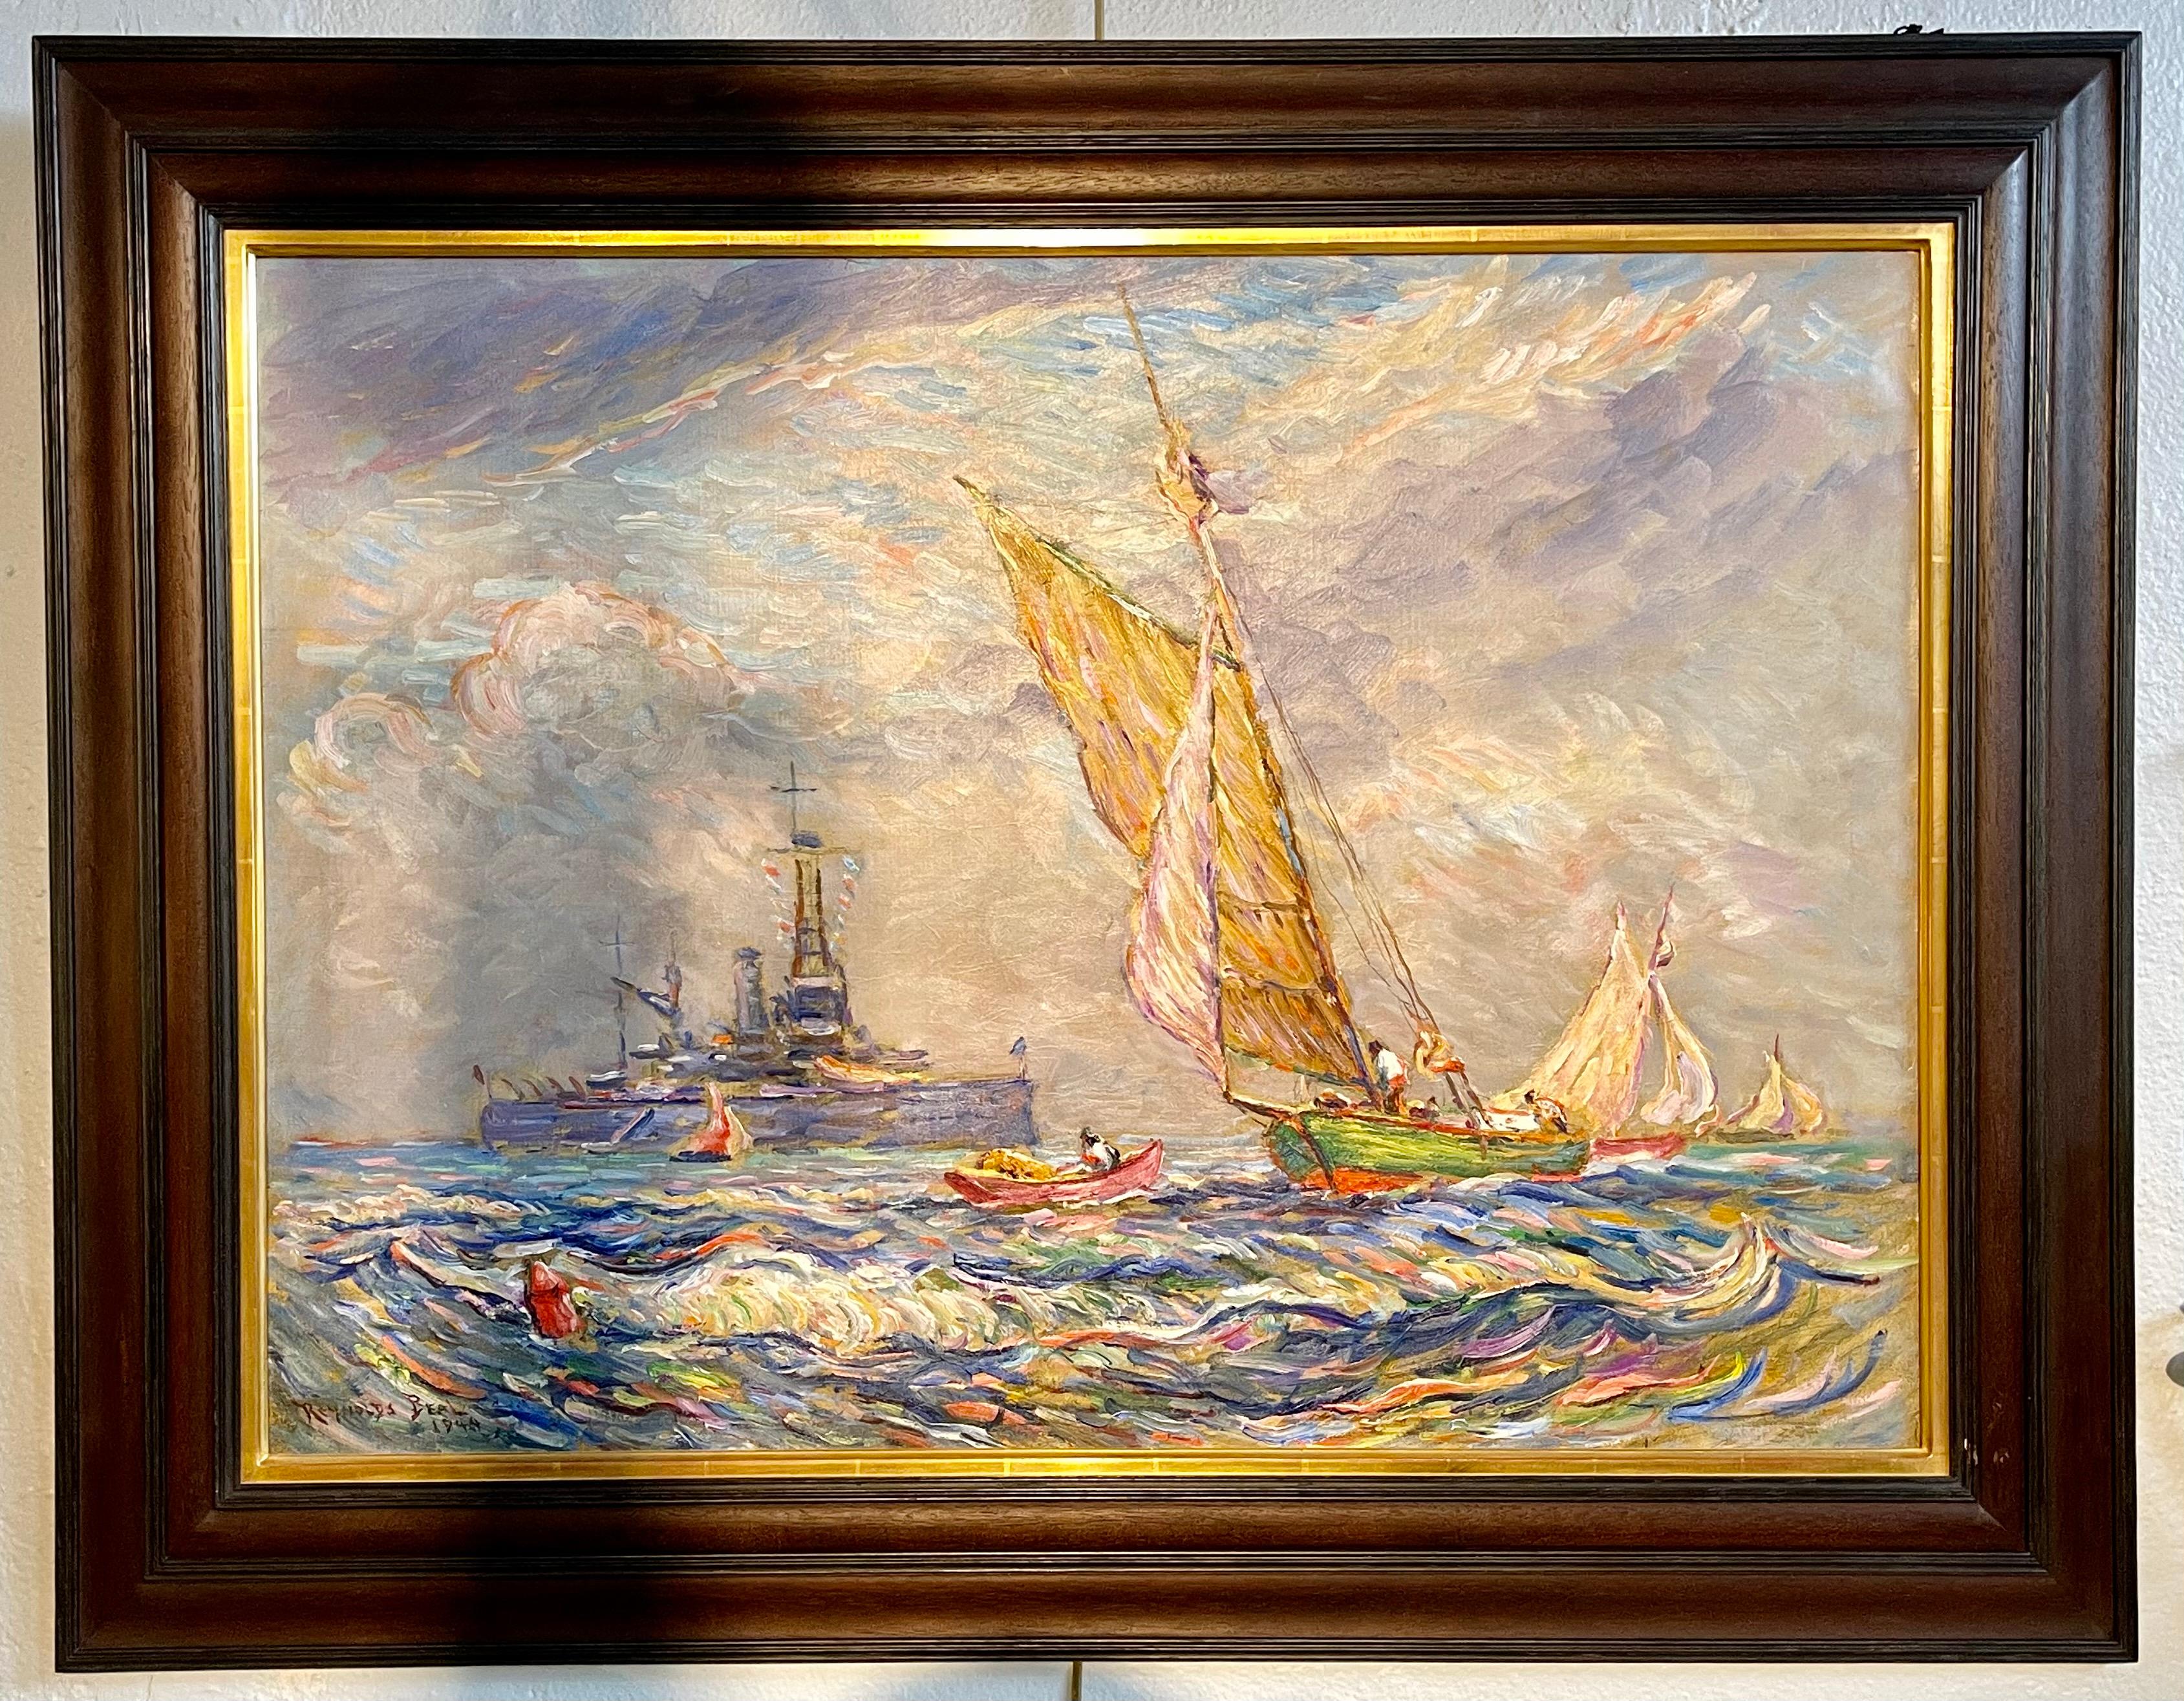 A fine impressionist oil on canvas by the well celebrated Reynolds Beal. Dated 1928 on verso and signed. The reverse bearing the Estate Stamp and Catalog page information. The USS Utah at Rockport Mass. In excellent condition. Unframed size is 26